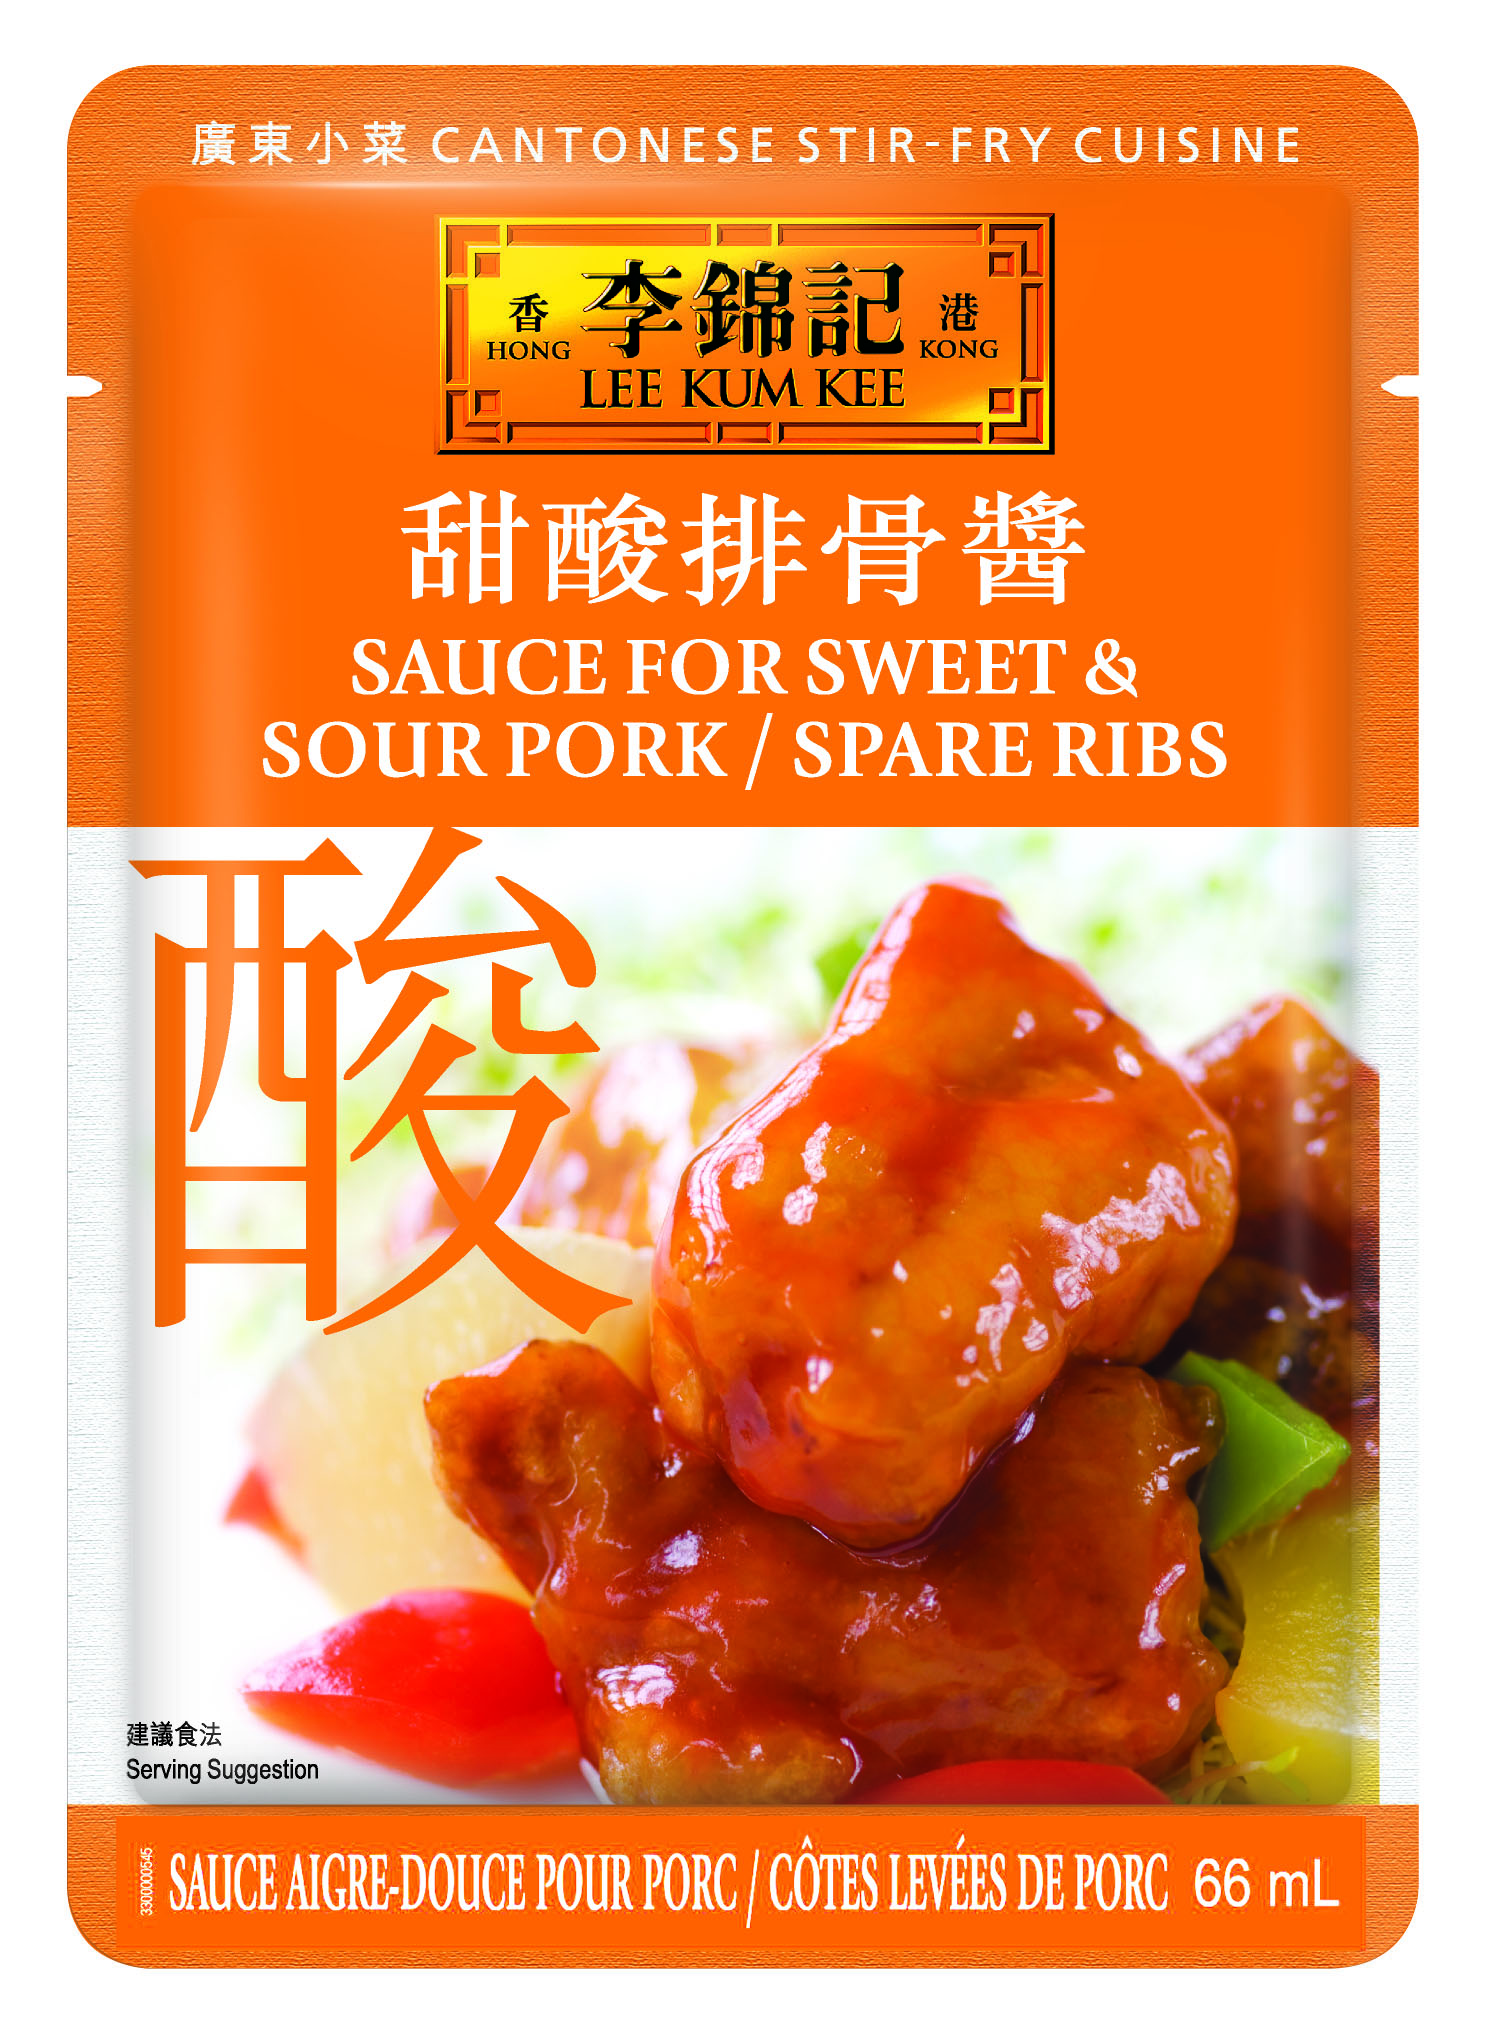 Sauce for Sweet & Sour Pork/Spare Ribs 66ml 